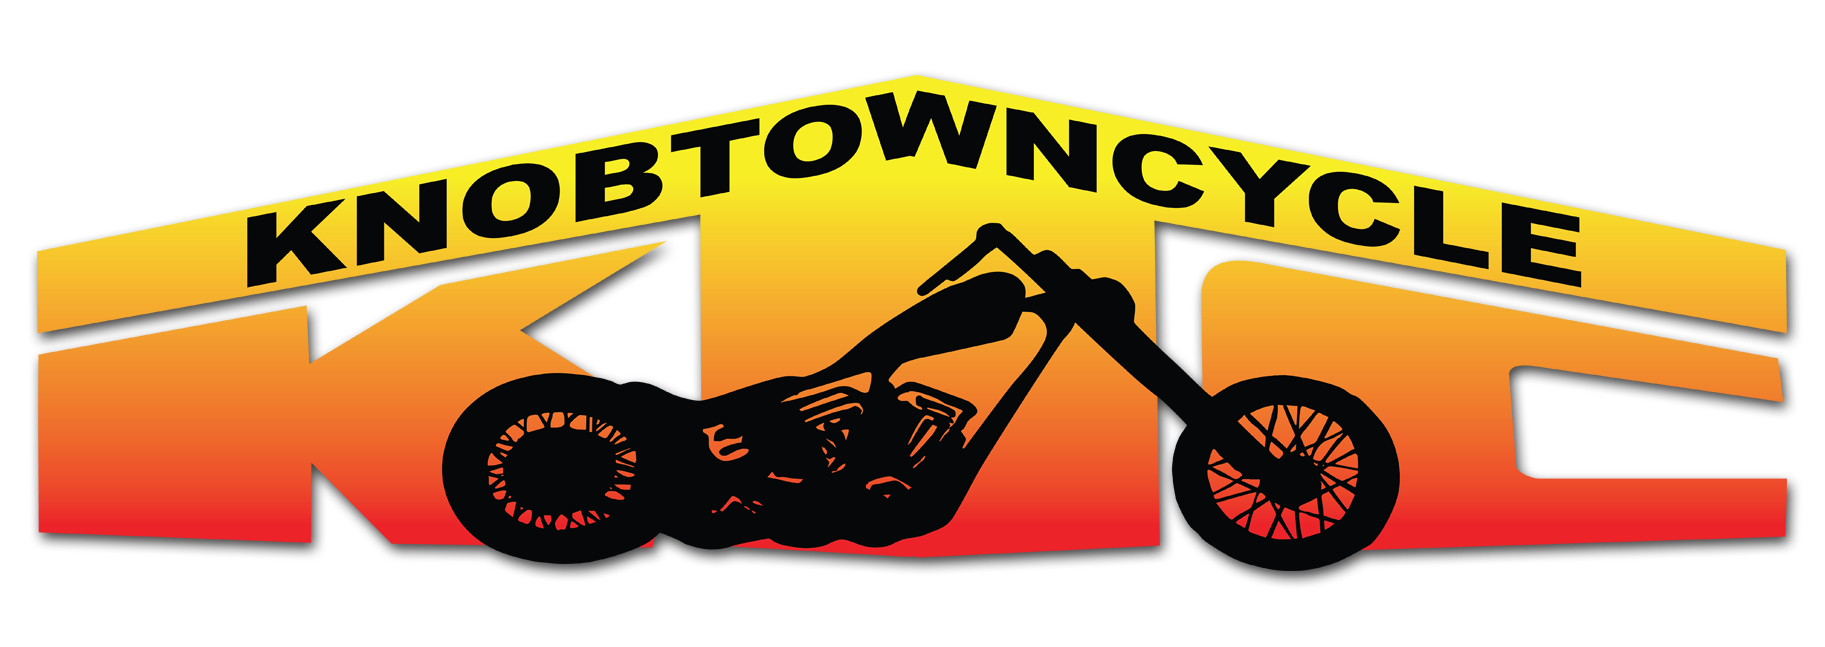 Harley Davidson, Revitalize Your Ride with Harley Davidson 3 Hole Service at Knobtown Cycle: The Ultimate Harley Davidson Oil Change Experience, Knobtown Cycle